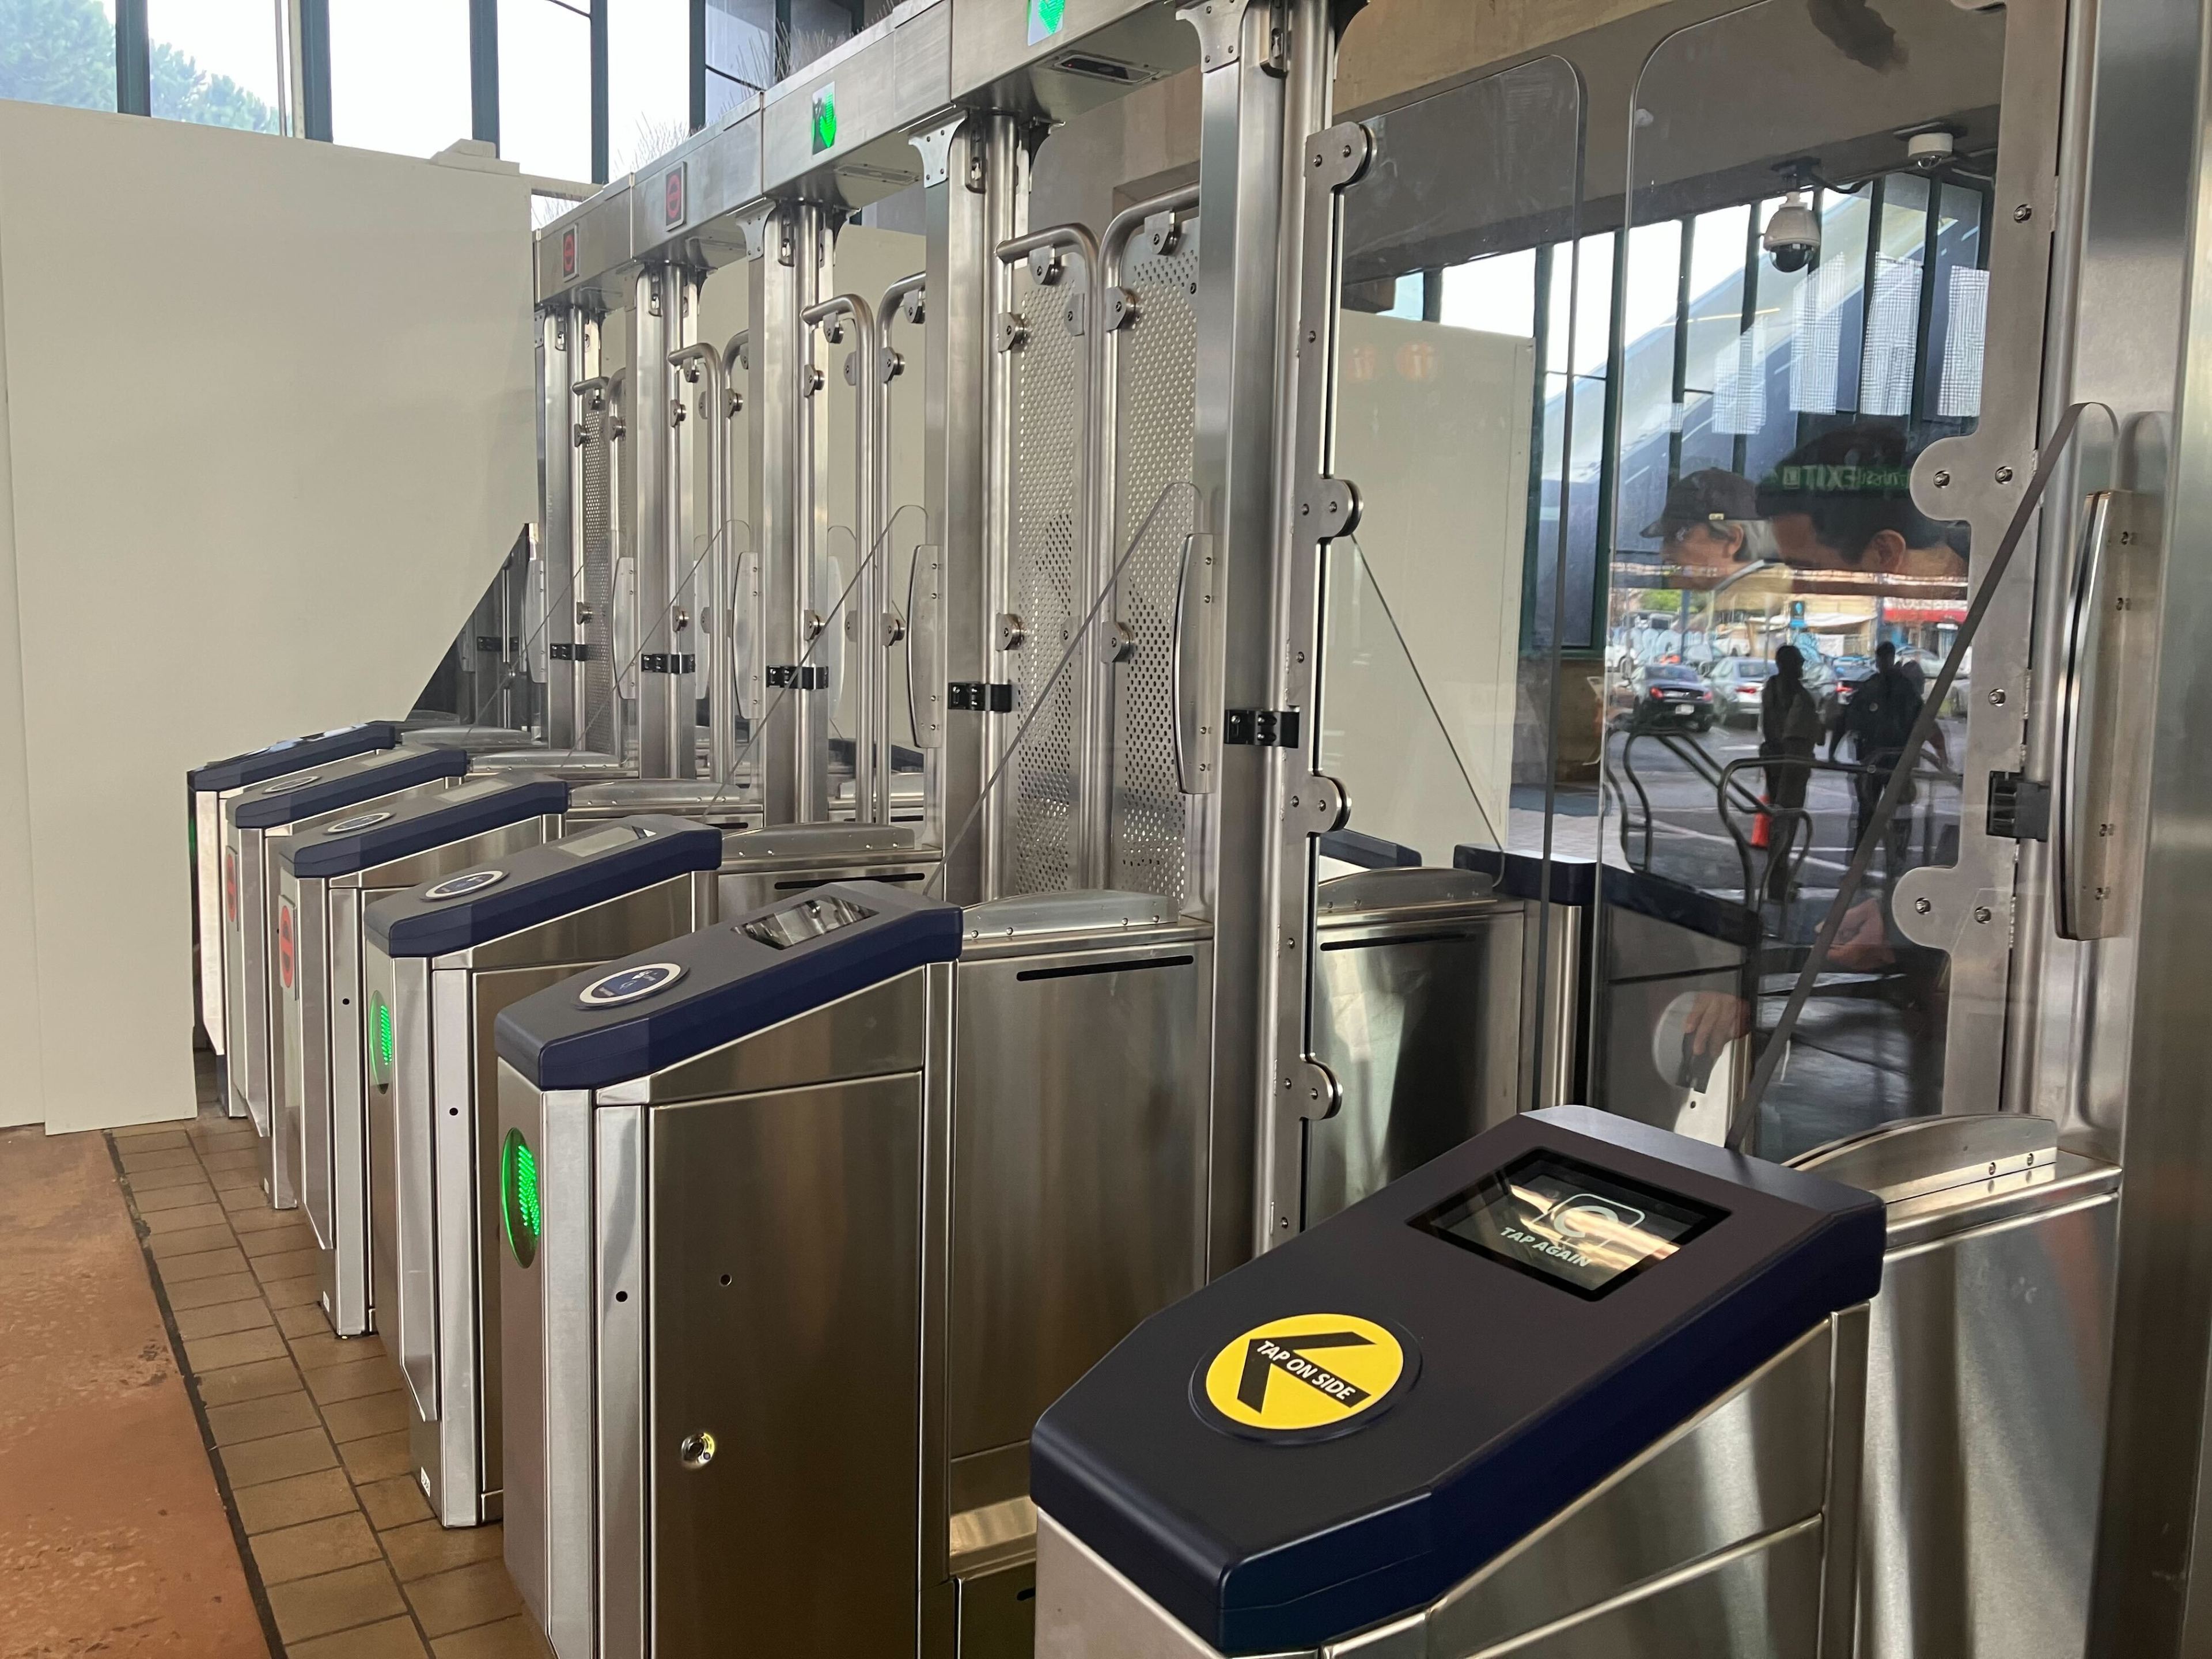 The five new fare gates that were opened at BART's West Oakland Station seen on Thursday, Dec. 28, 2023.